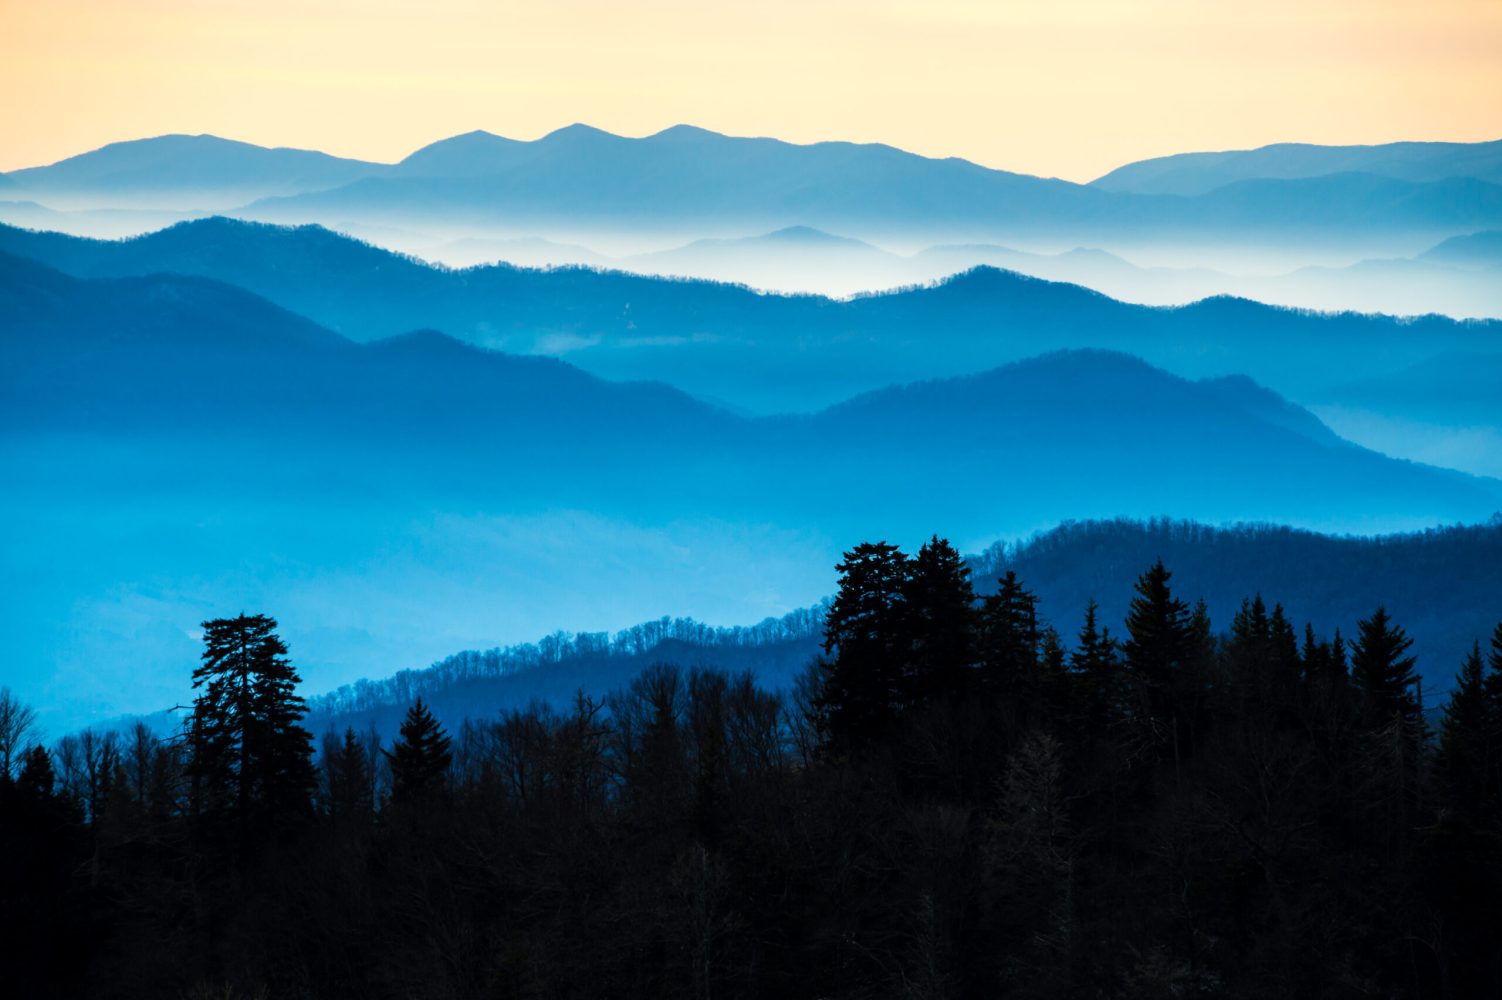 View of the "Blue Smoky" of Smoky Mountains from Route 441 Newfound Gap in the Great Smoky Mountains National Park in Tennessee